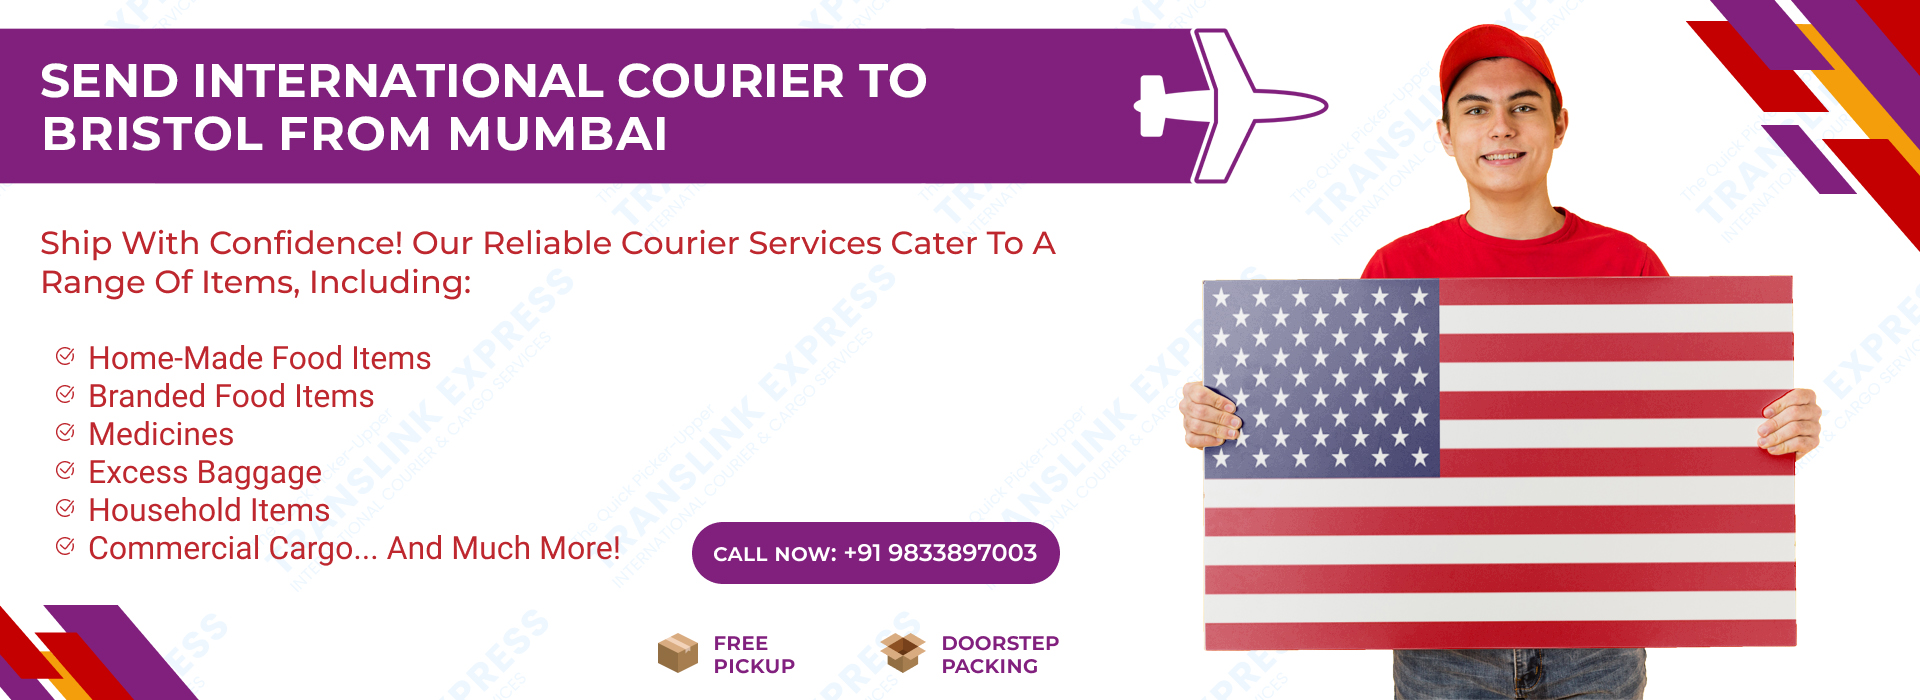 Courier to Bristol From Mumbai